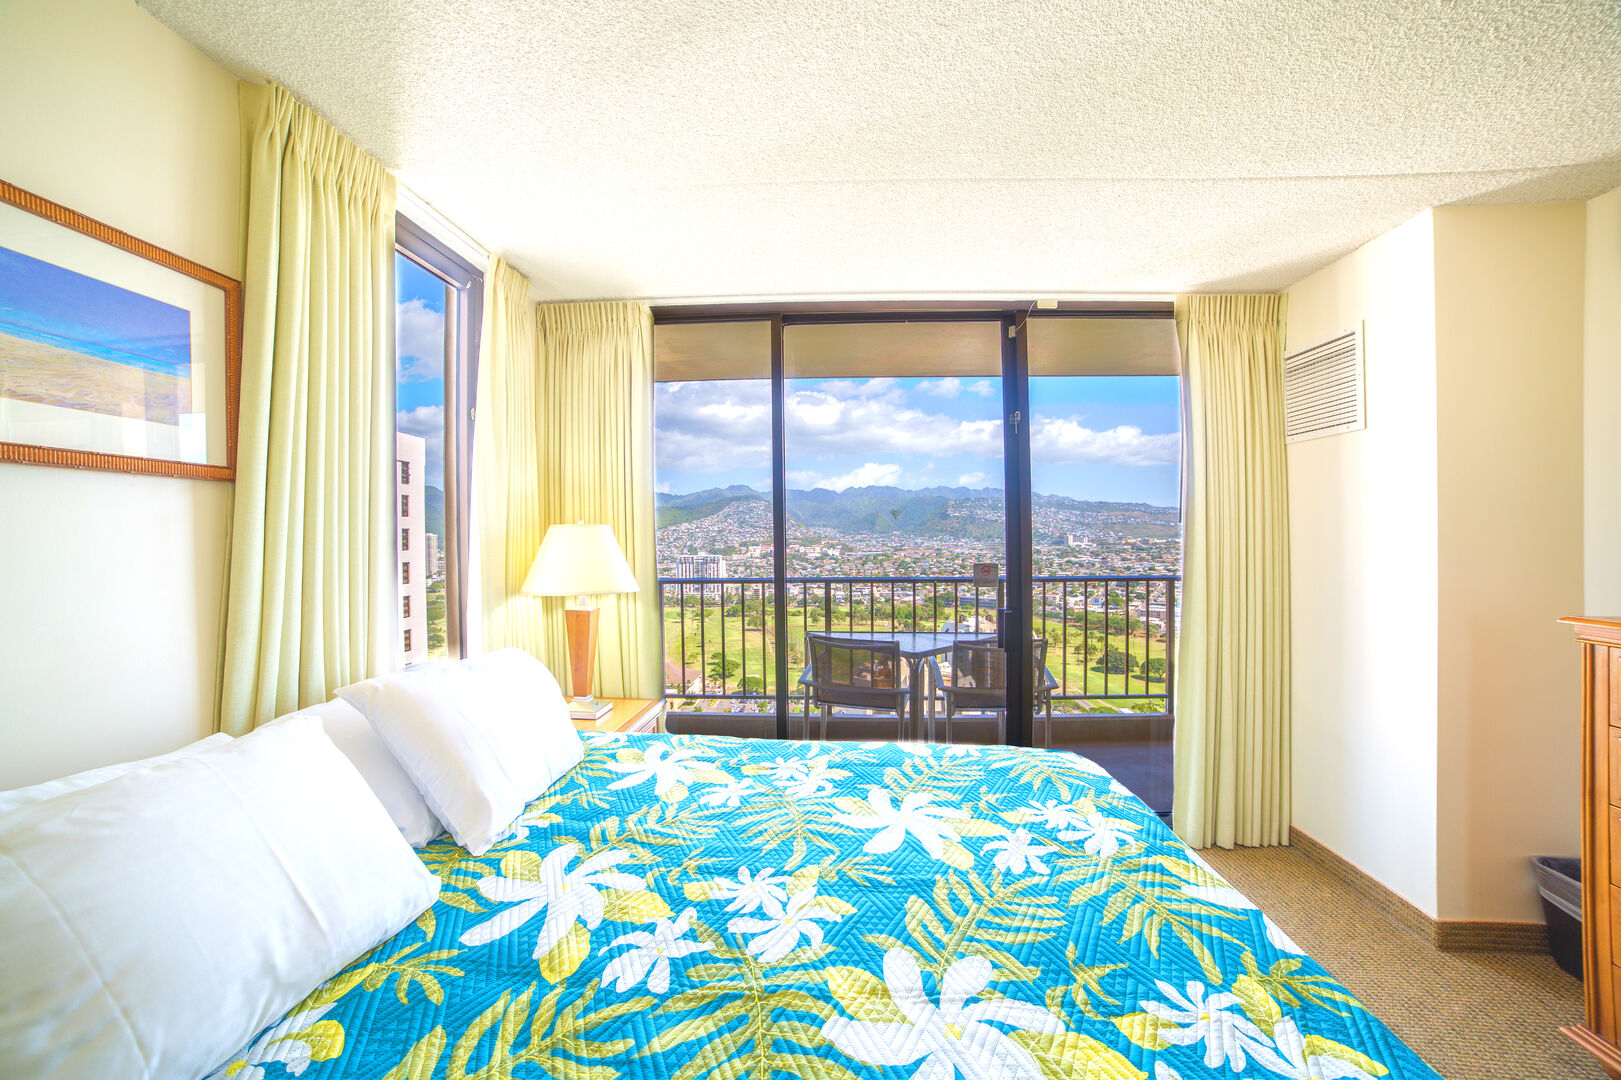 Bedroom with beautiful mountain and city views, king-size bed and TV